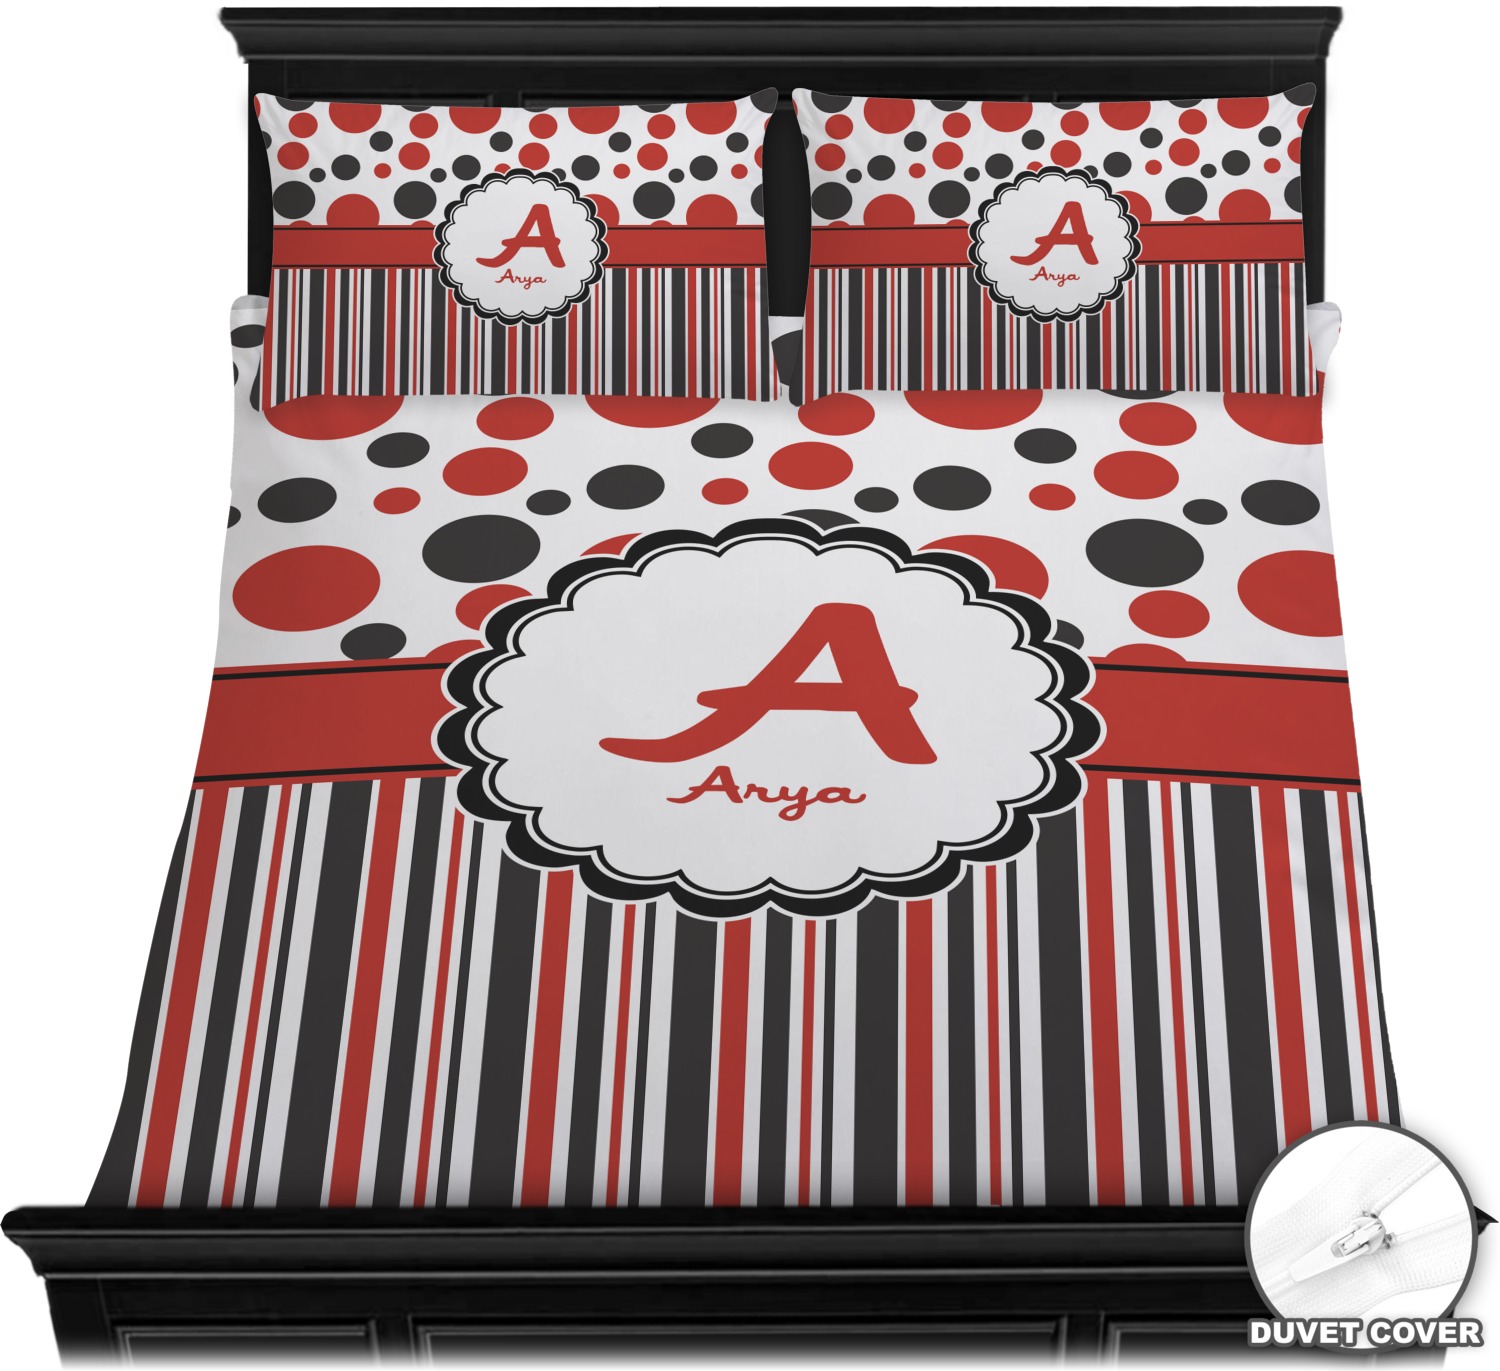 Red Black Dots Stripes Duvet Covers Personalized